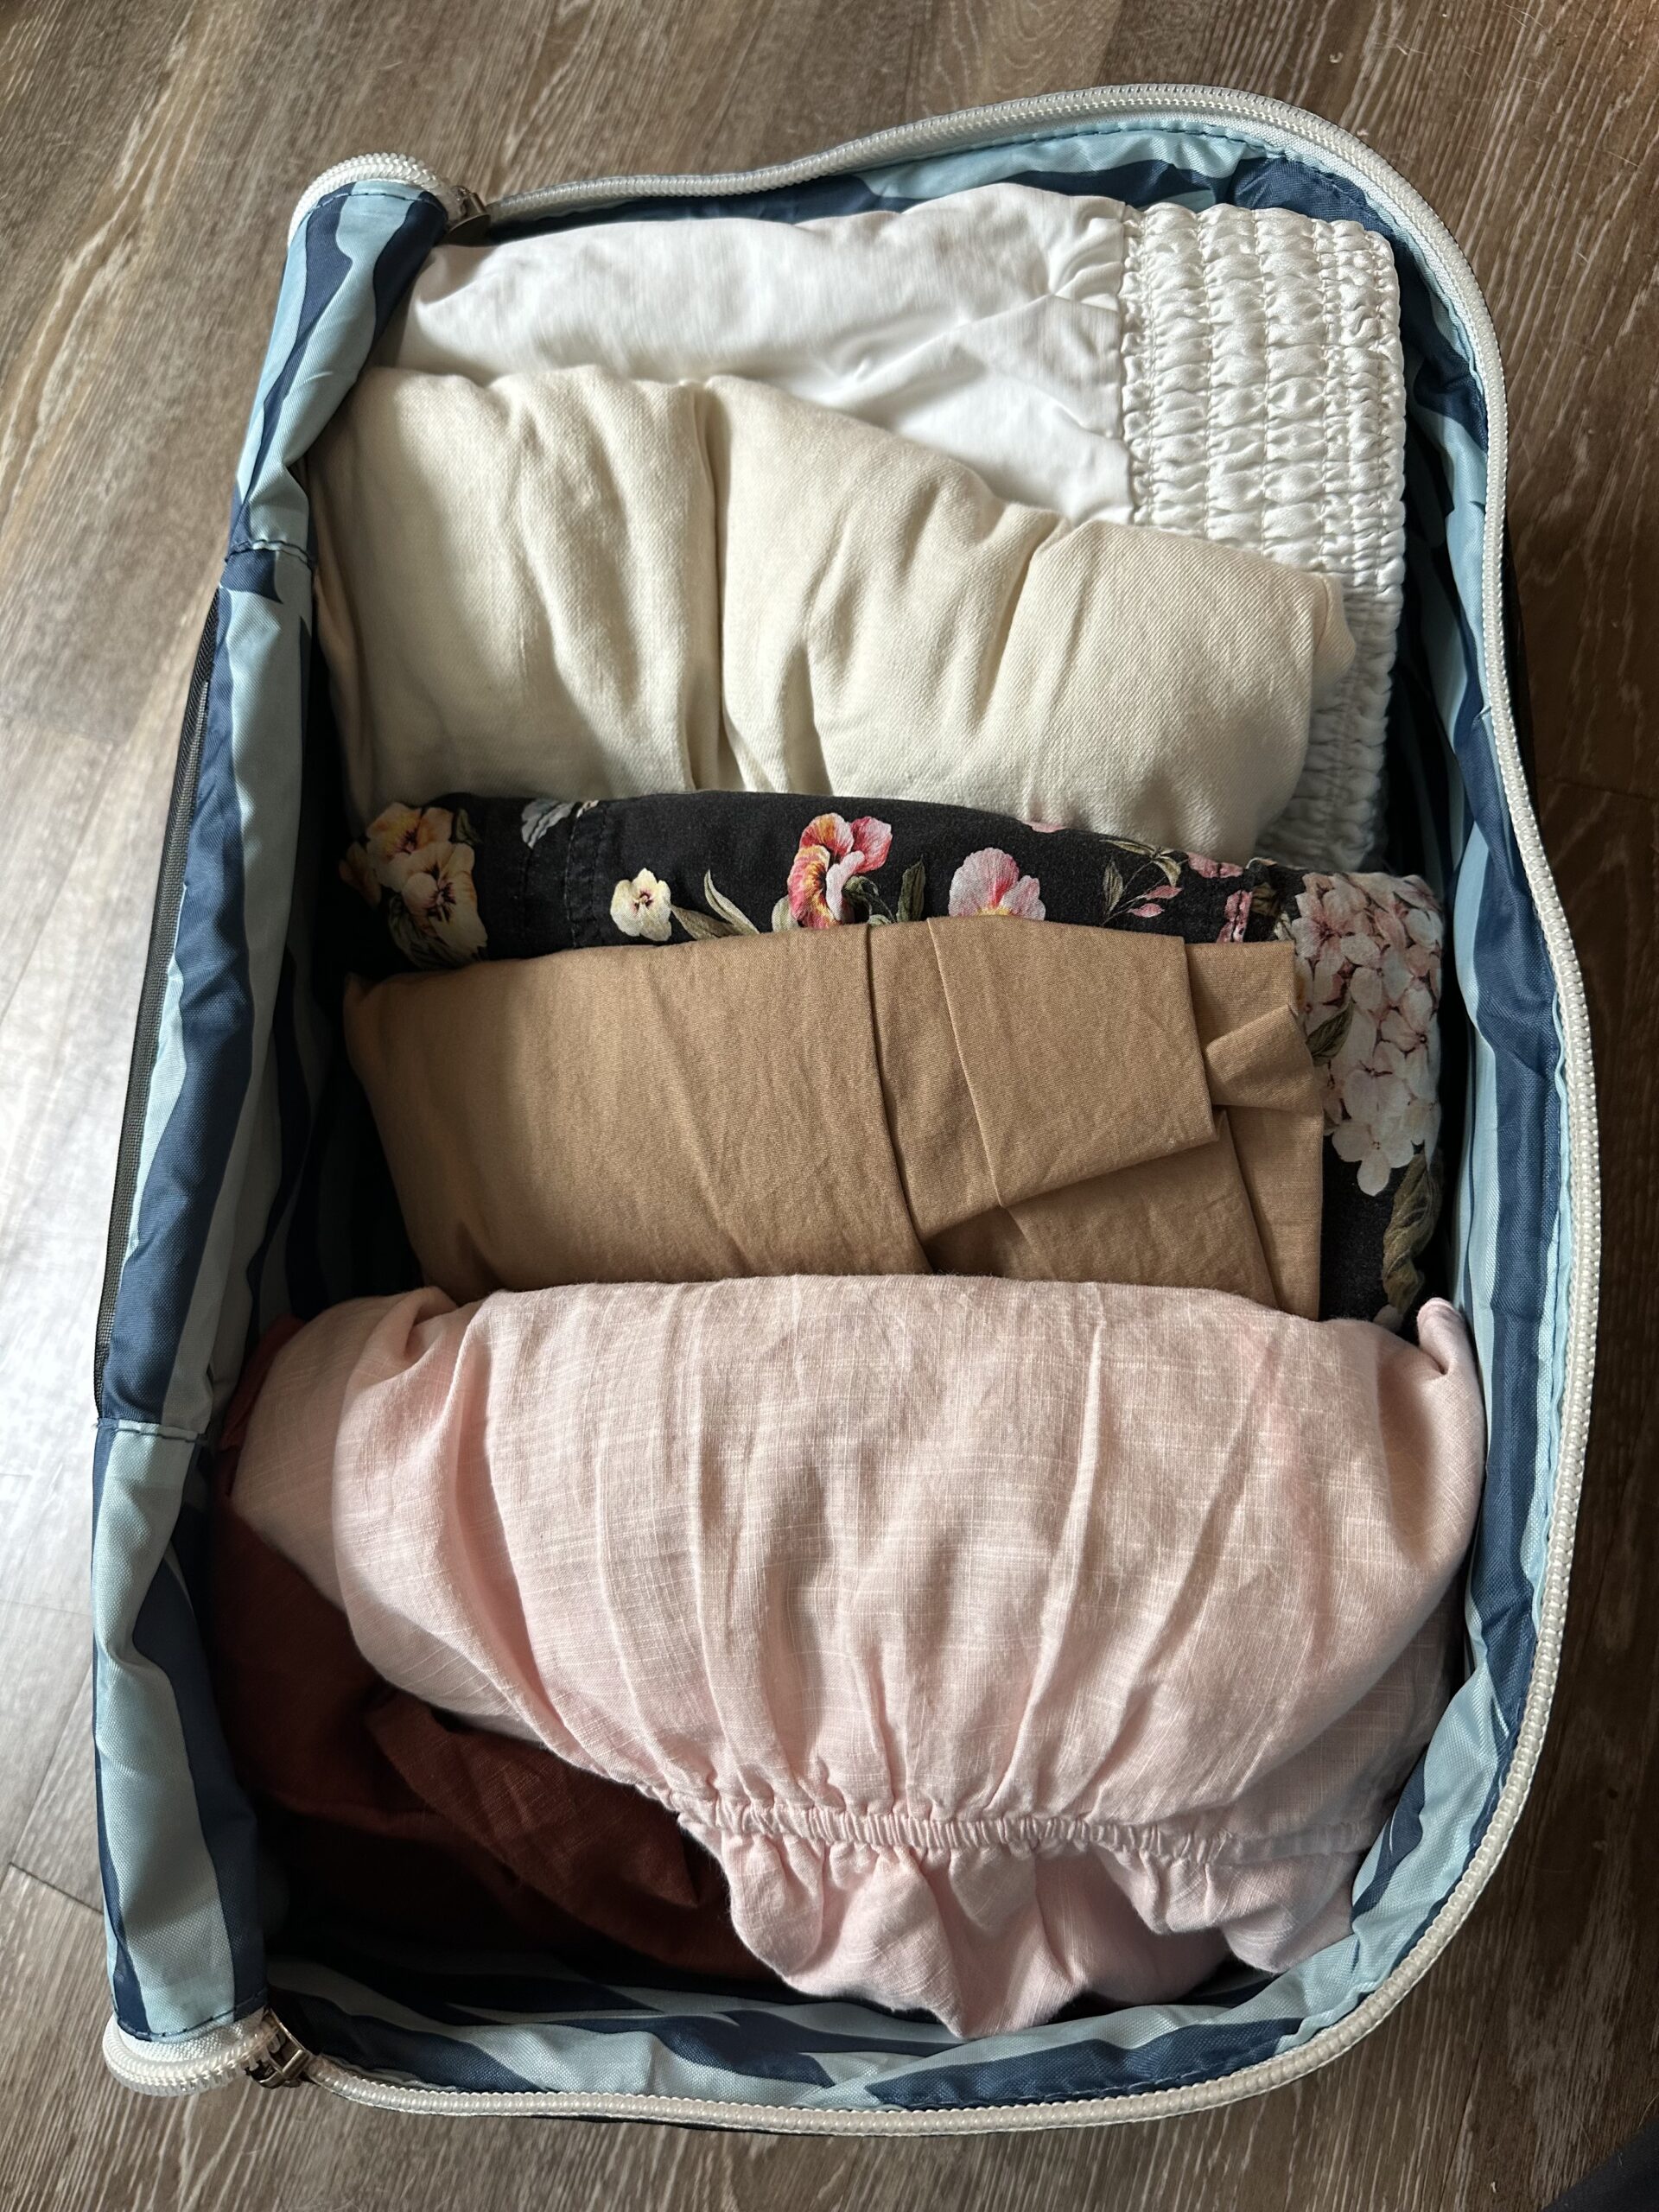 Open suitcase packed with folded clothes, including floral patterns and plain textiles, viewed from above on a wooden floor.